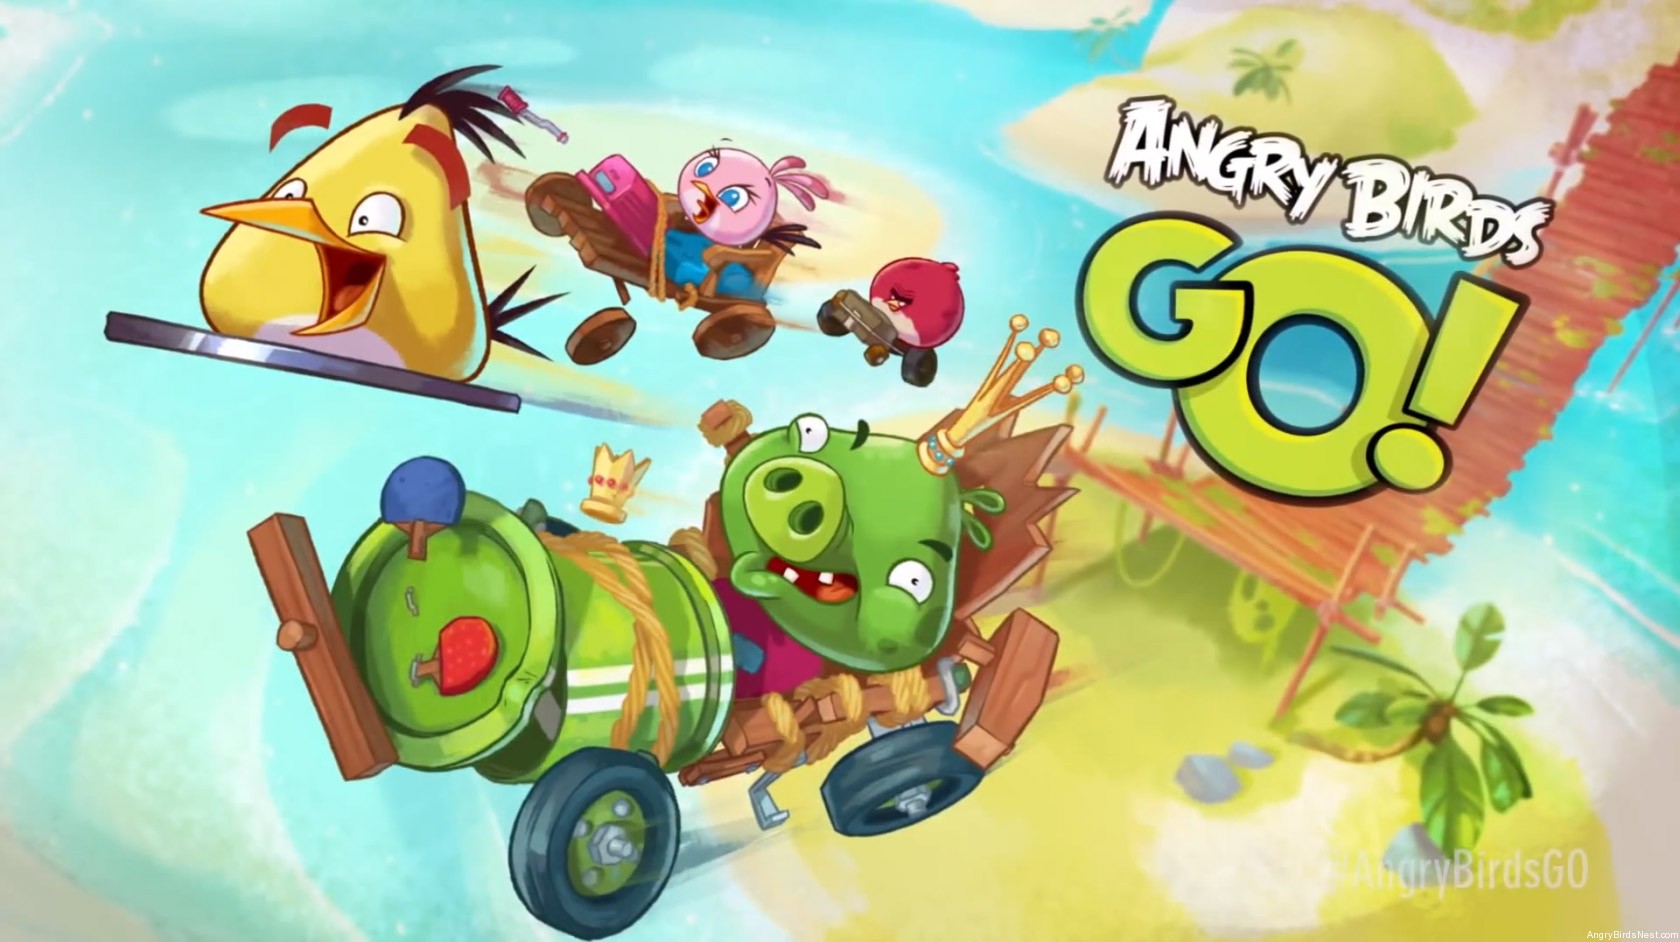 Angry Birds Go Official Gameplay Trailer and Release Date -  AngryBirdsNest.com